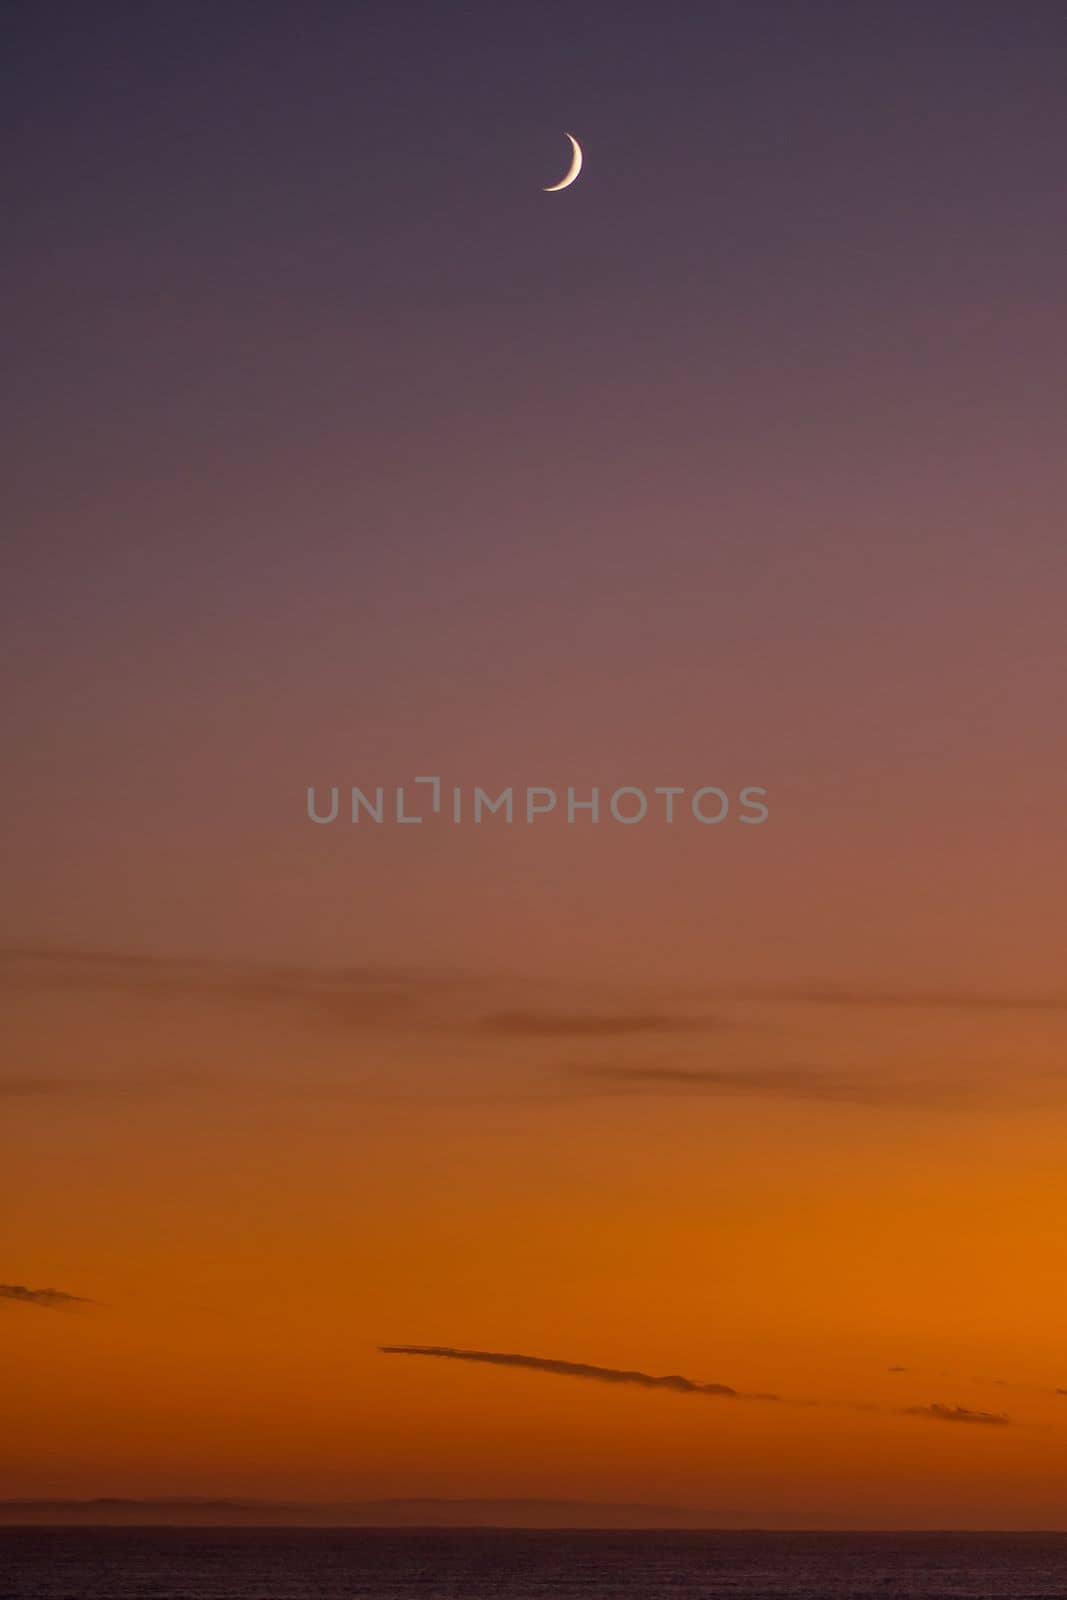 Sunrise over the Indian Ocean at Struisbaai with moon visible by dpreezg